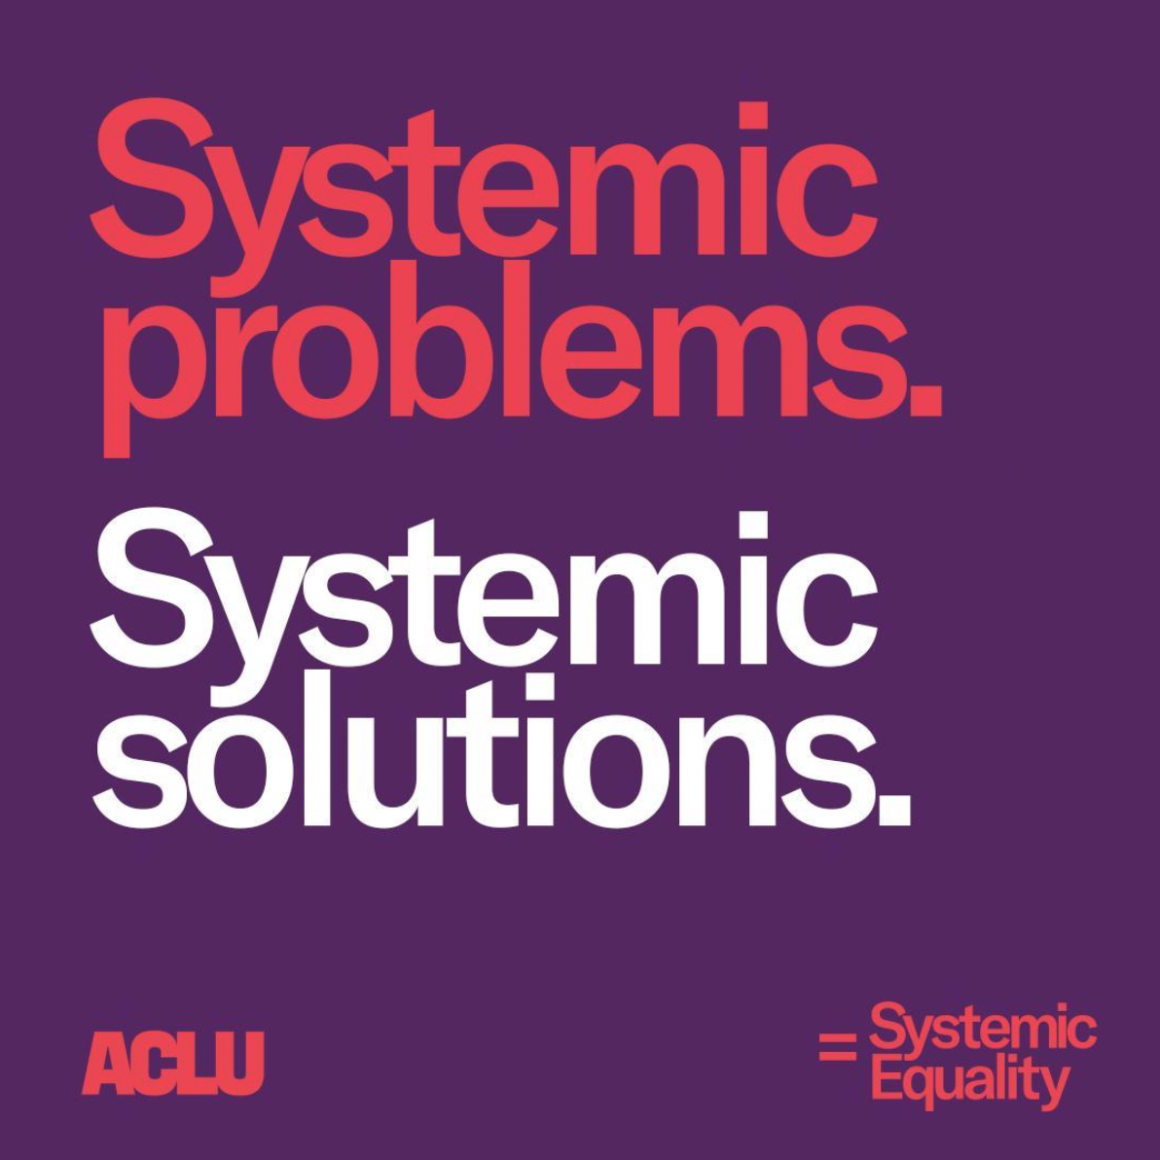 systemic-equality